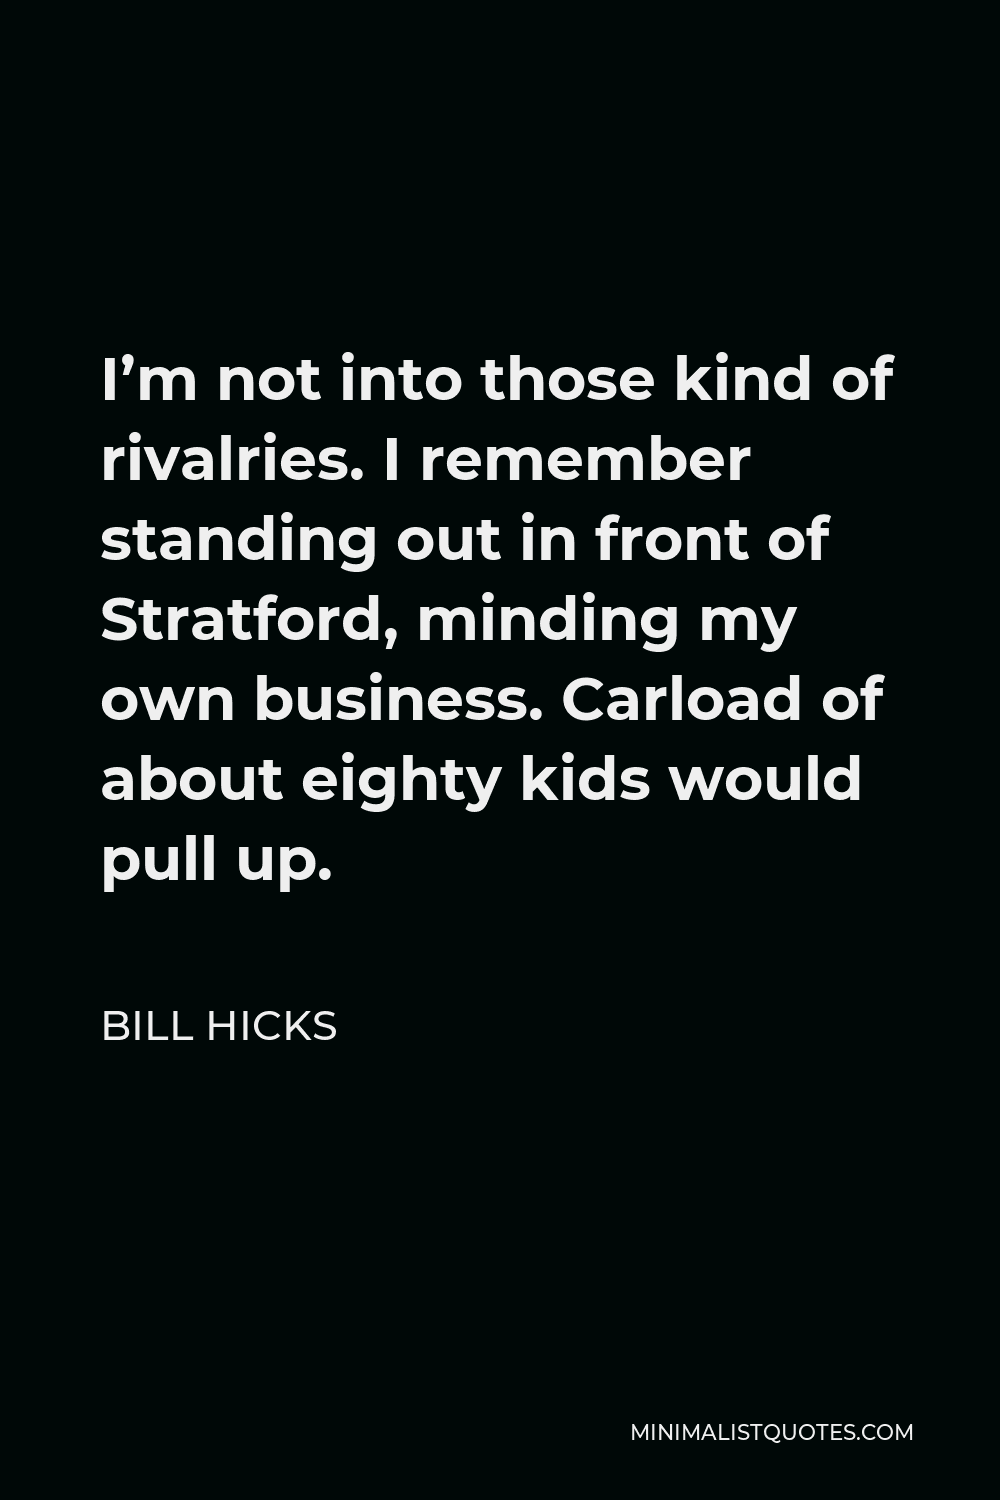 Bill Hicks Quote - I’m not into those kind of rivalries. I remember standing out in front of Stratford, minding my own business. Carload of about eighty kids would pull up.